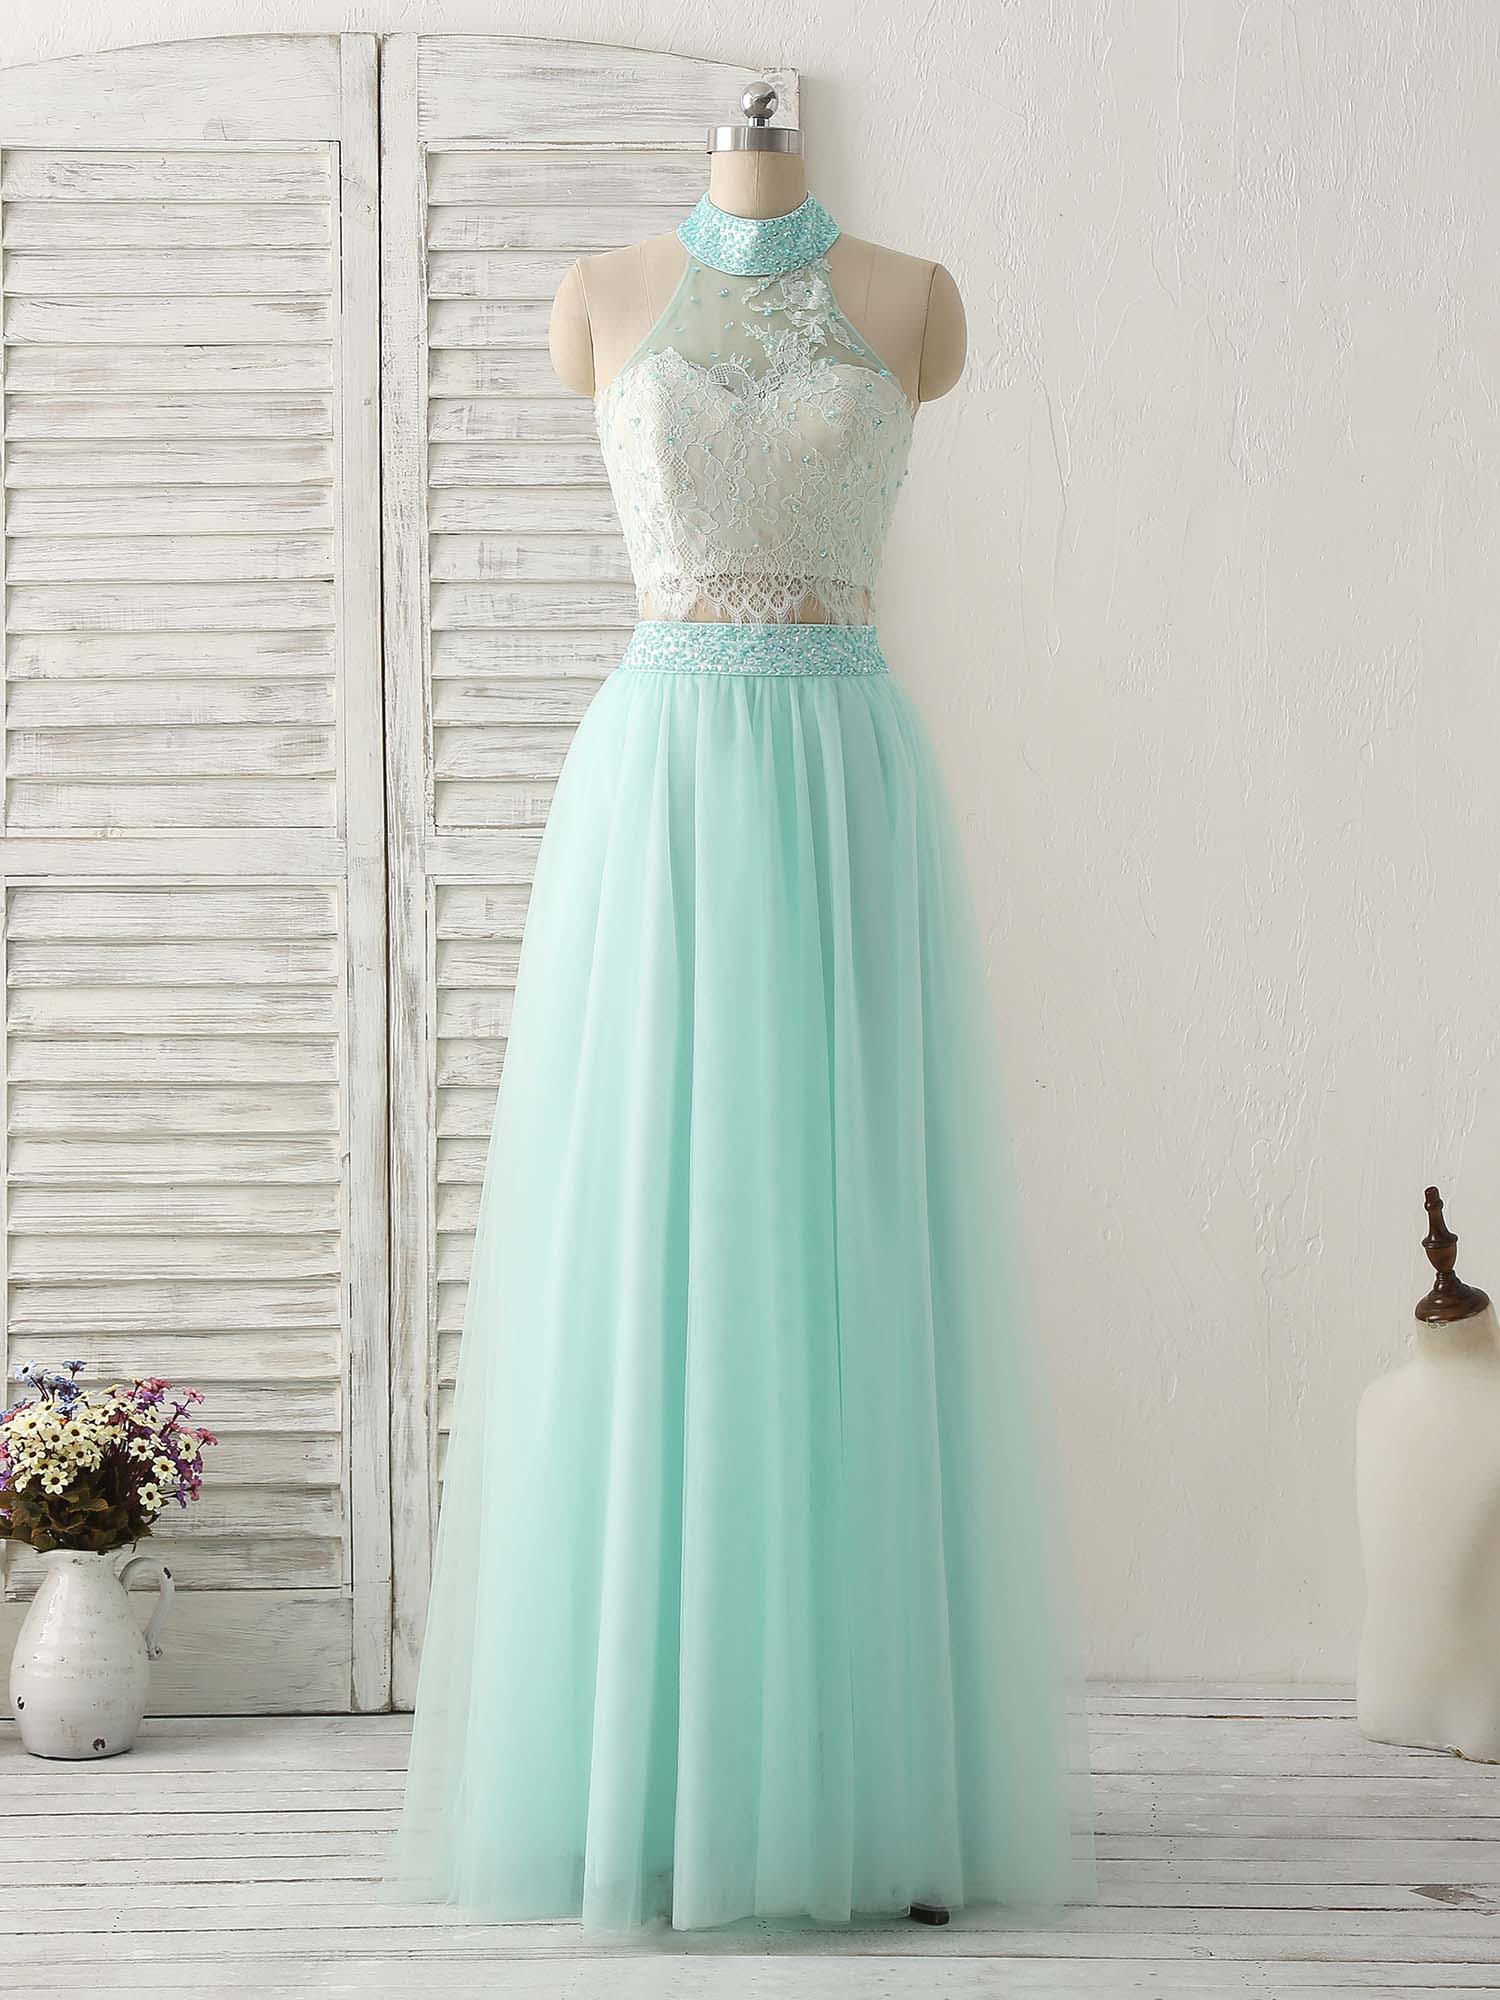 Green Tulle Two Pieces Long Prom Dress Outfits For Women Lace Beads Formal Dress